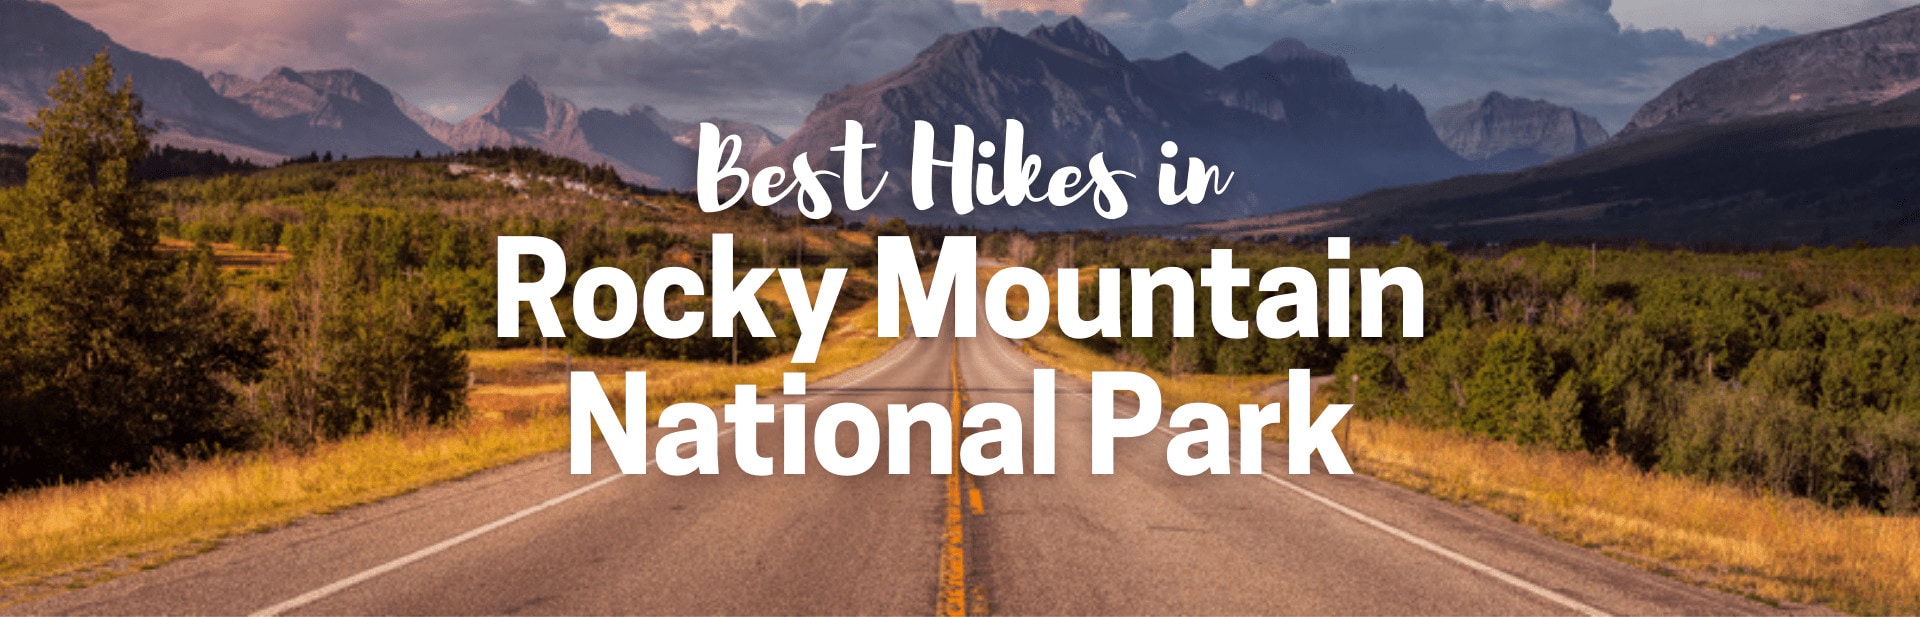 14 Best Hikes In Rocky Mountain National Park: For All Ages and Seasons